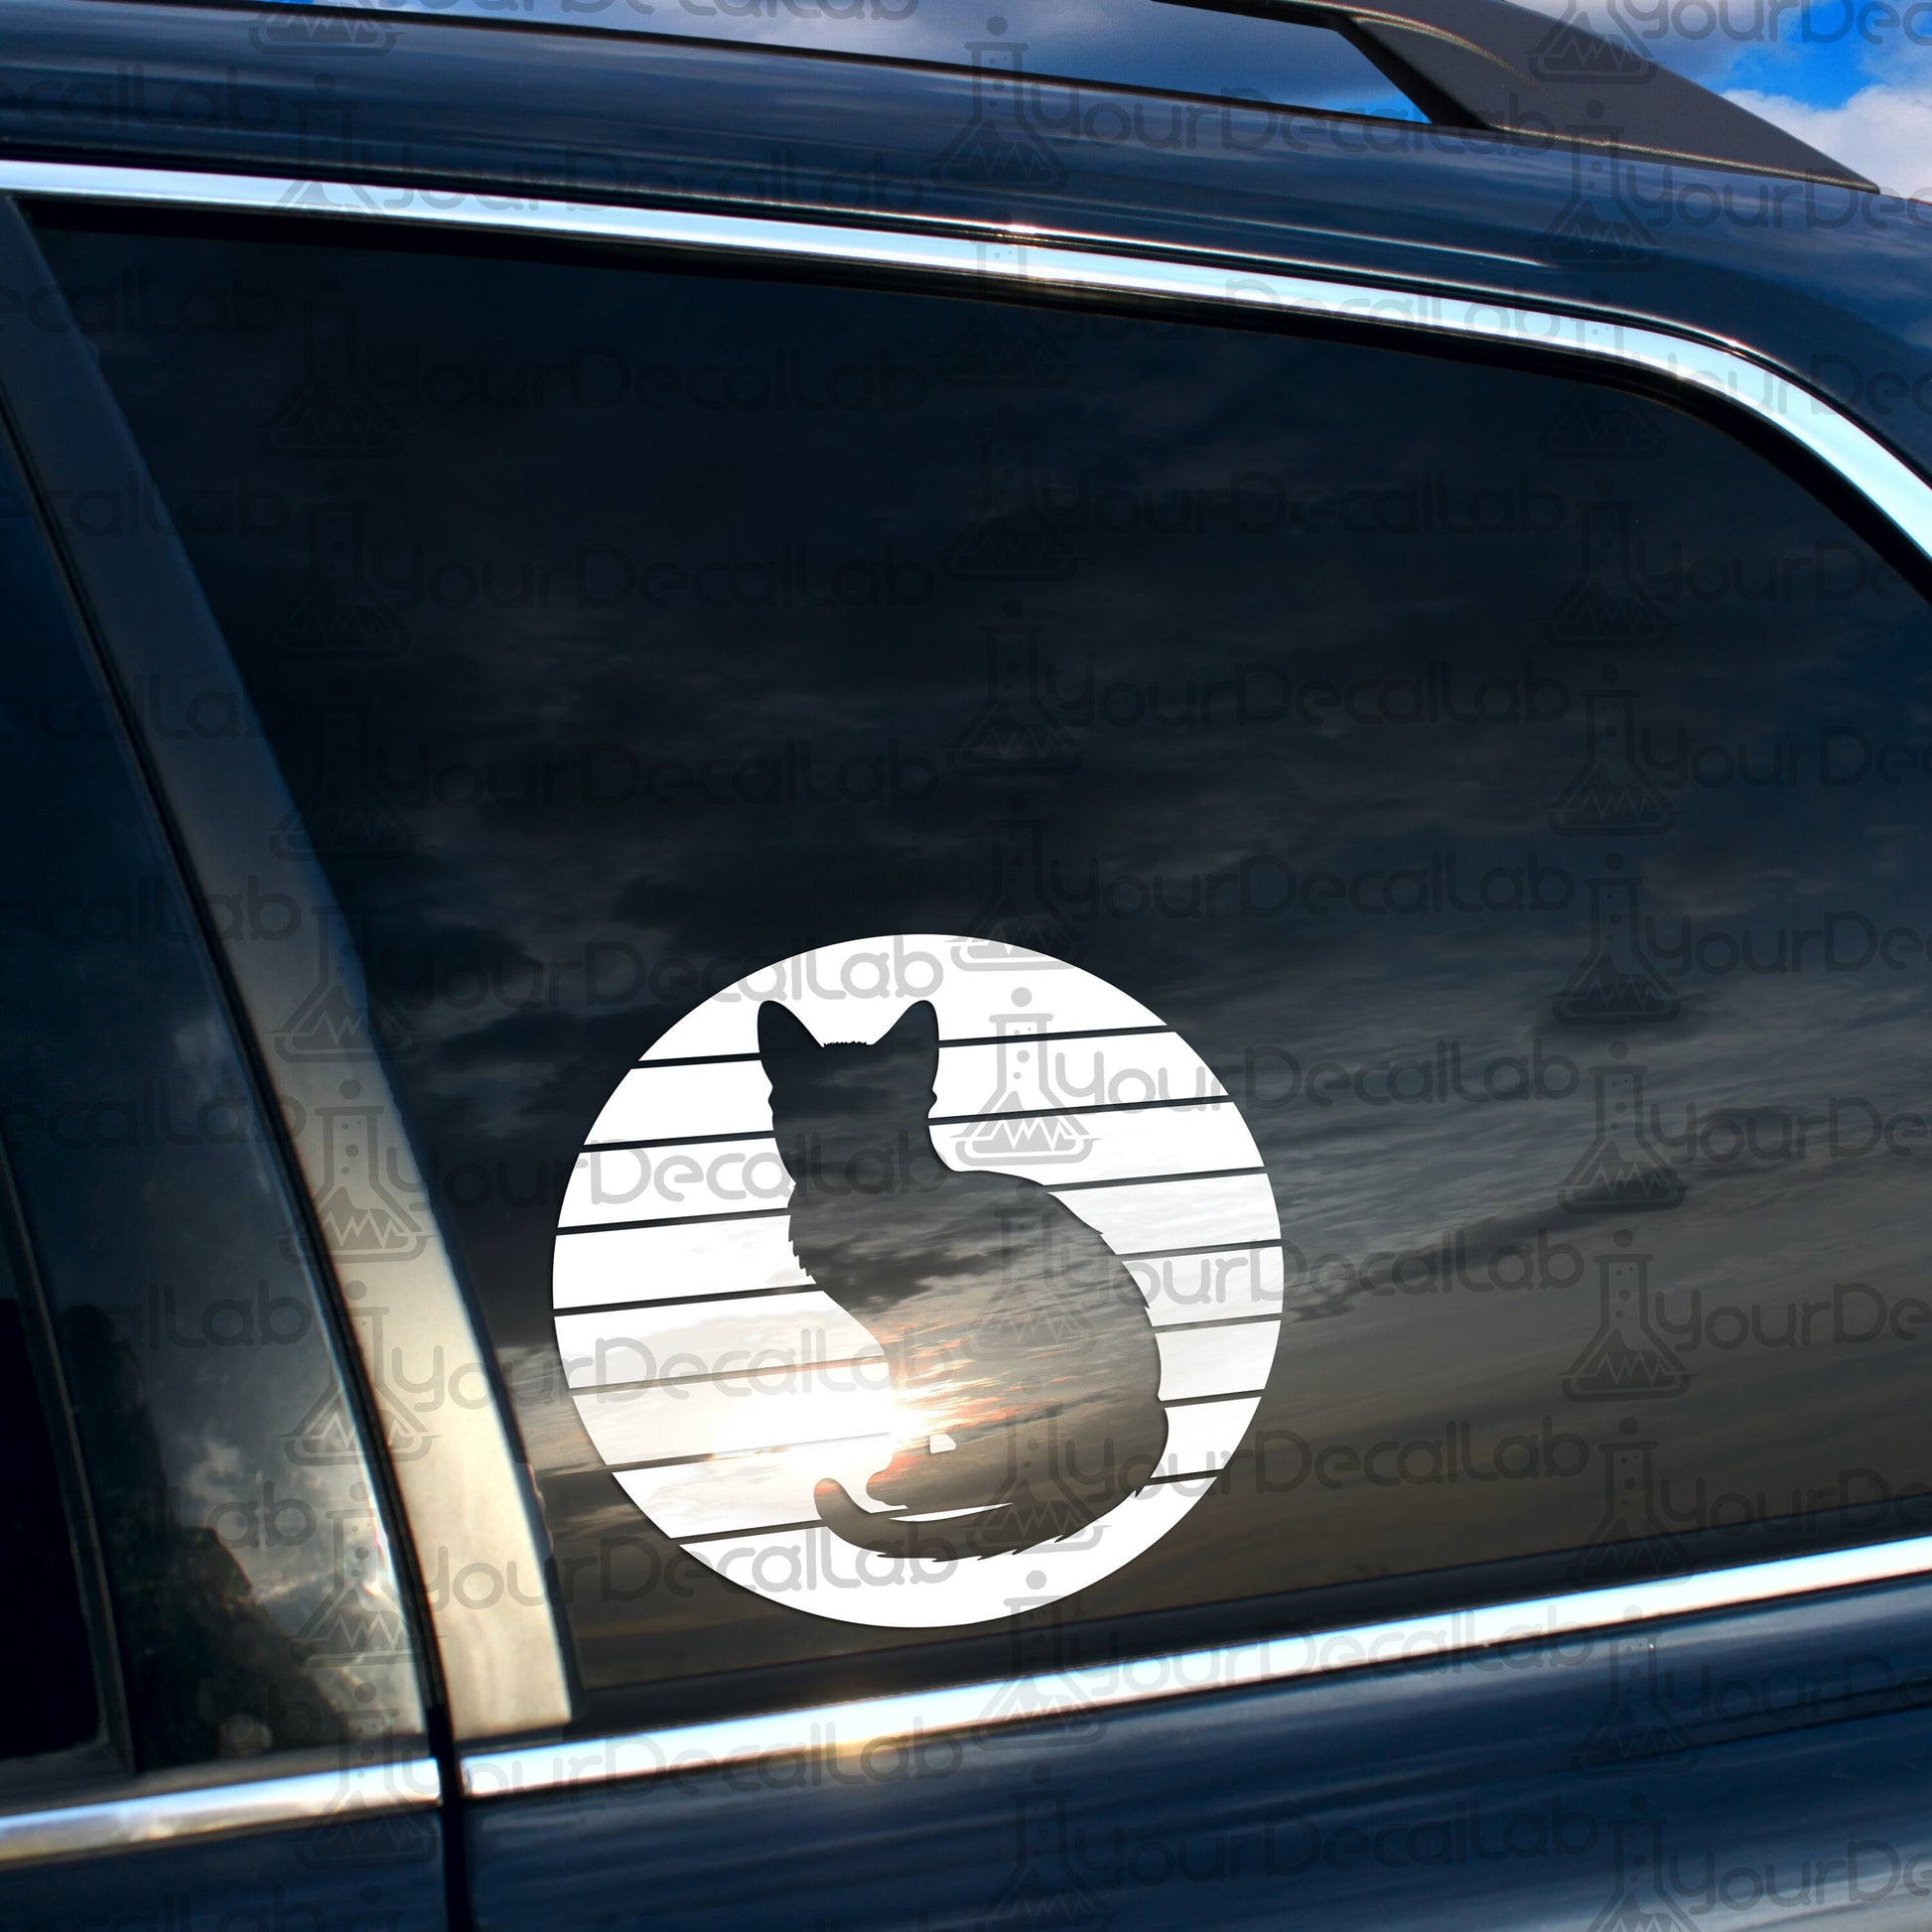 a cat sticker on the side of a car